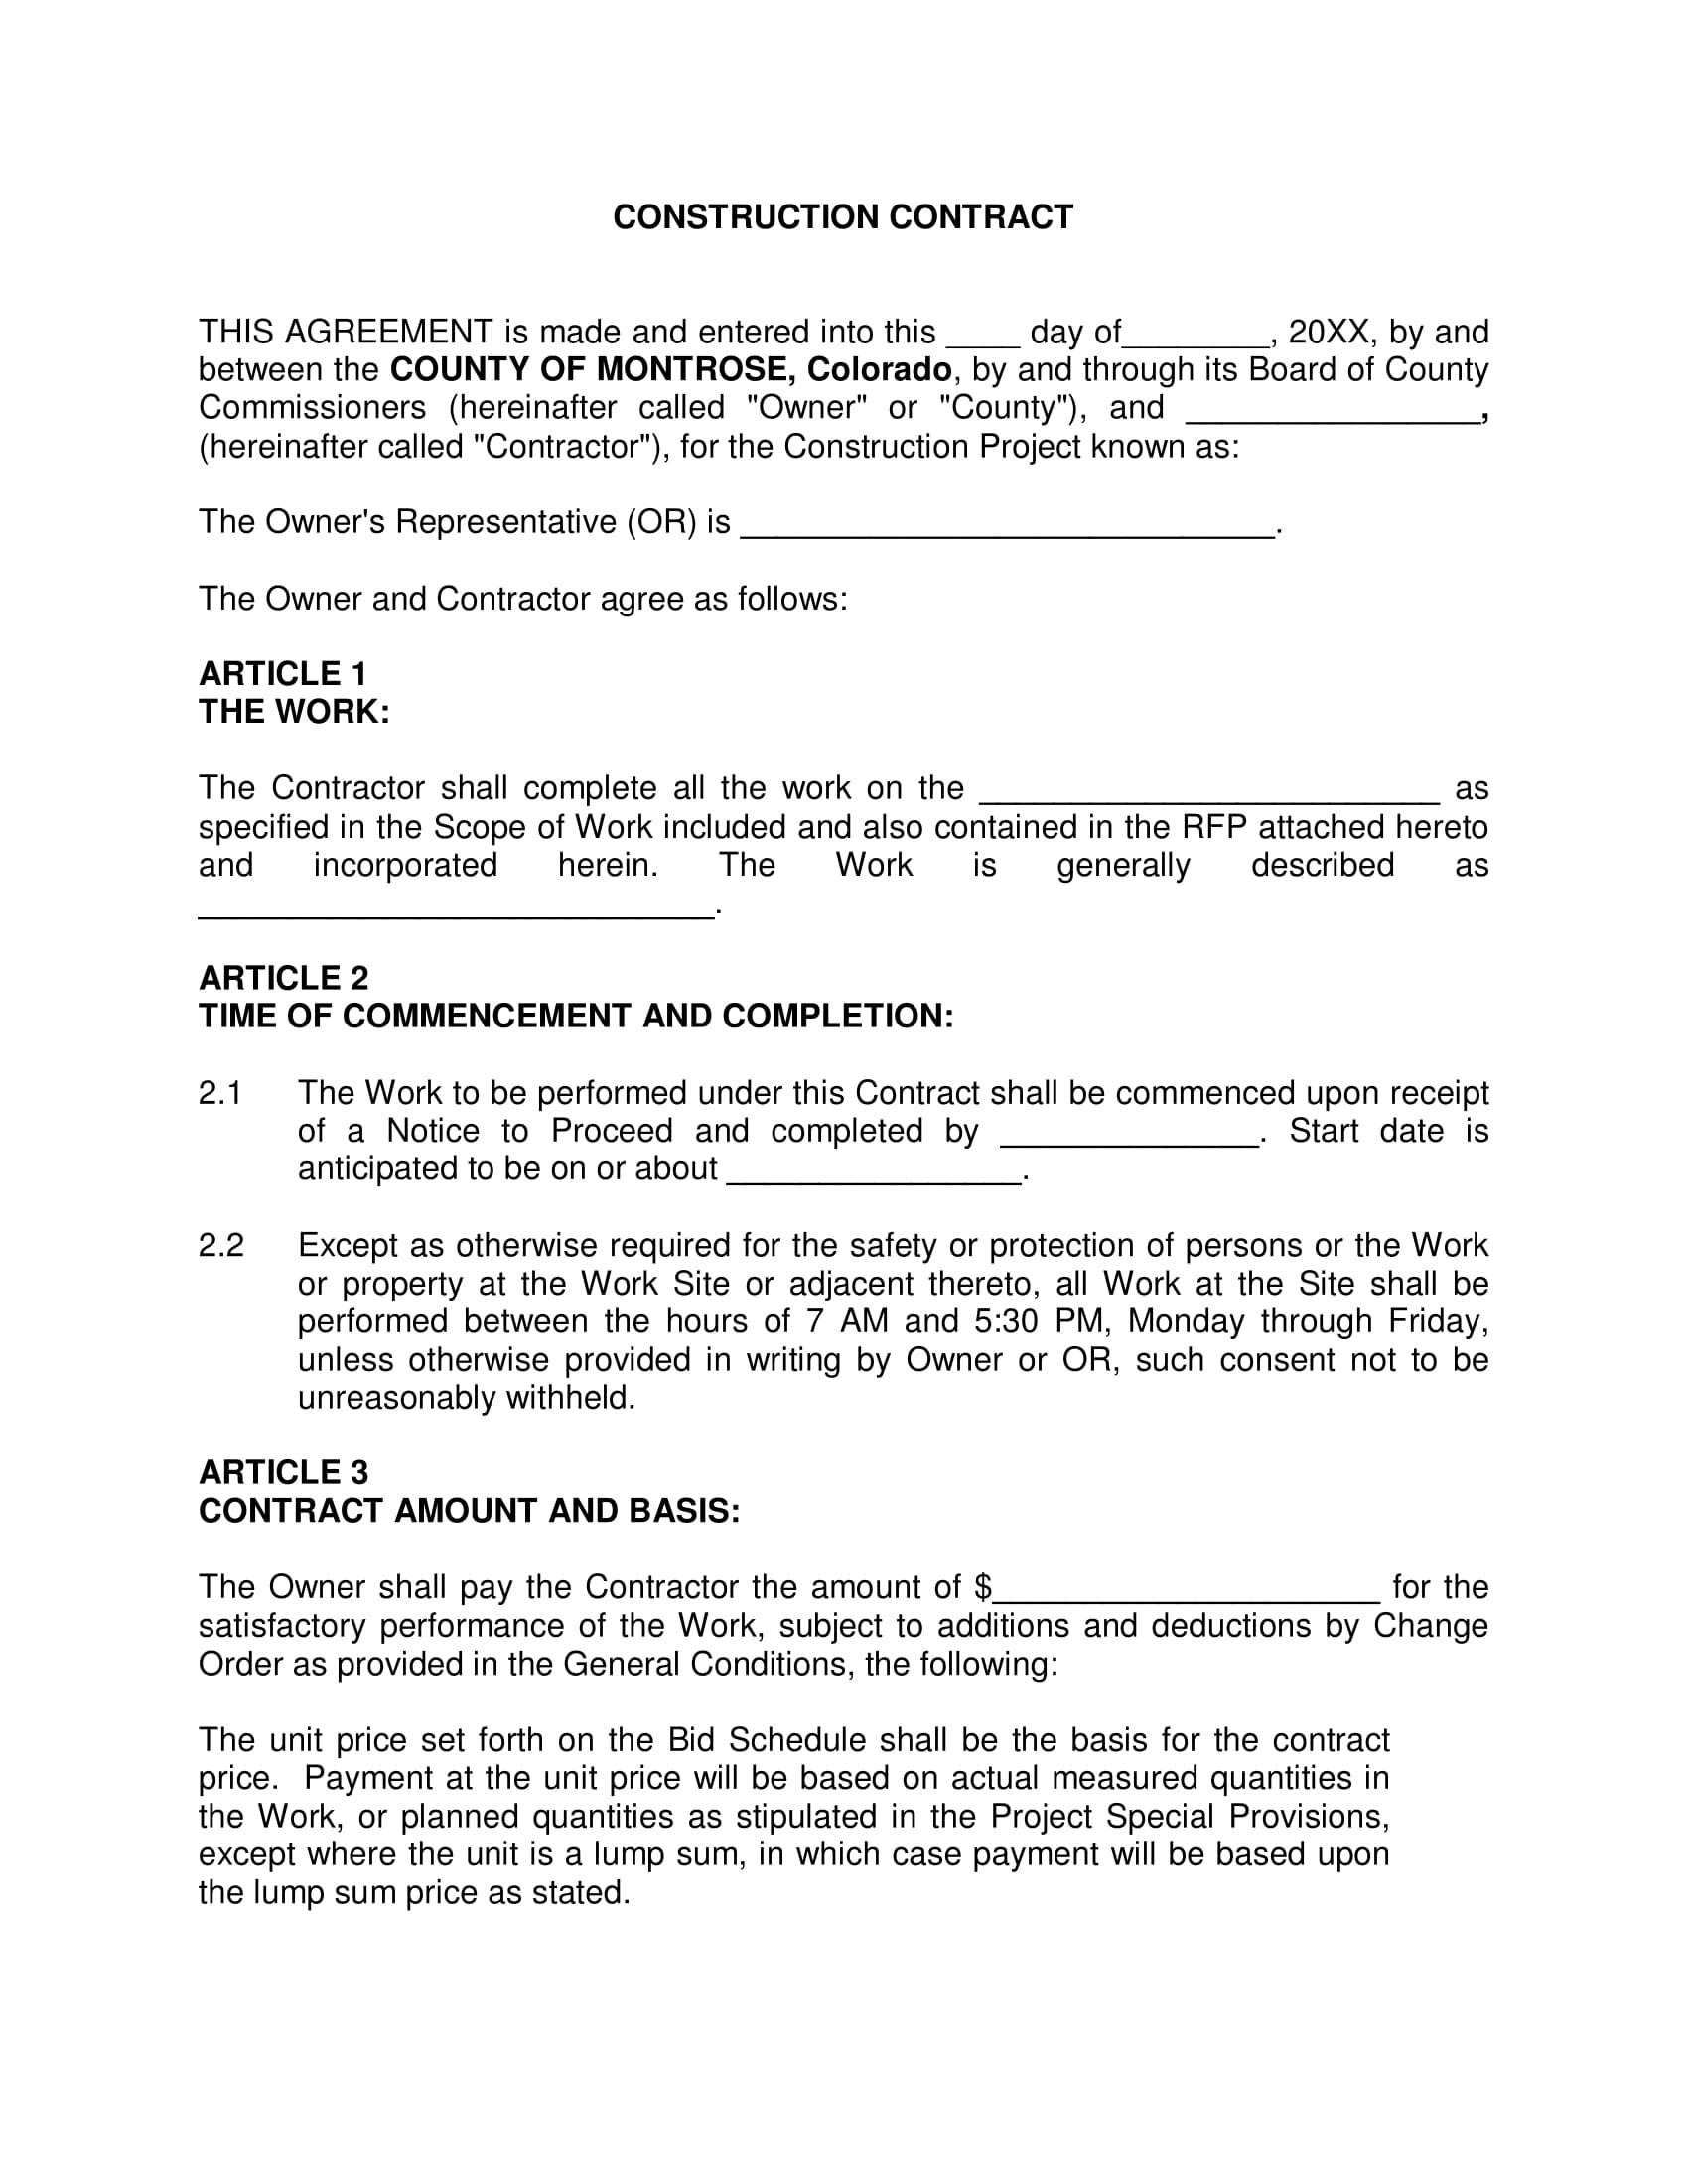 construction contract agreement form 01